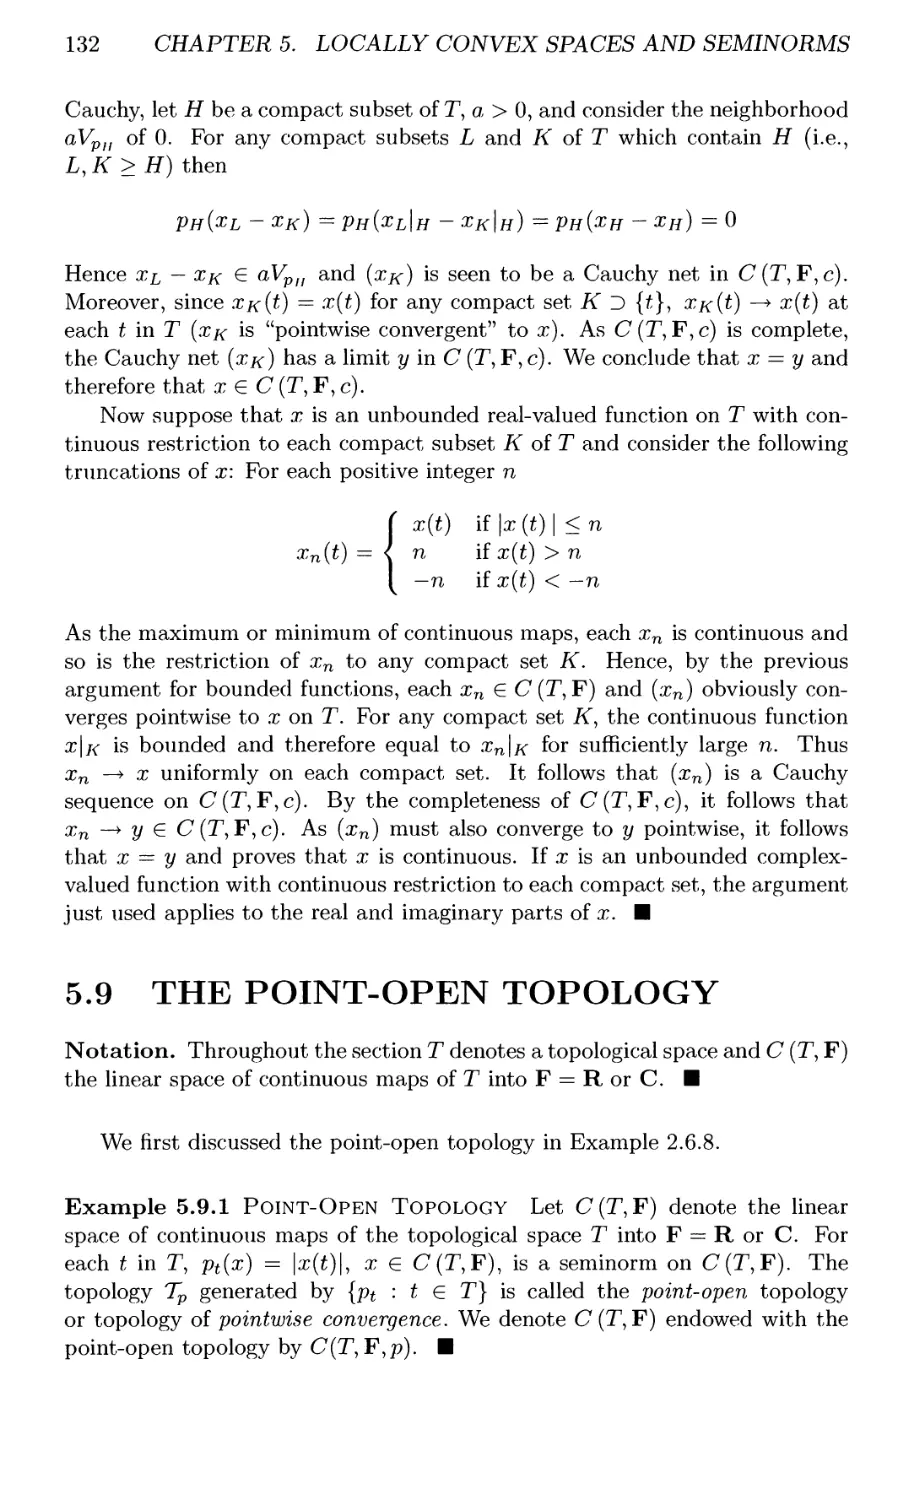 5.9 THE POINT-OPEN TOPOLOGY